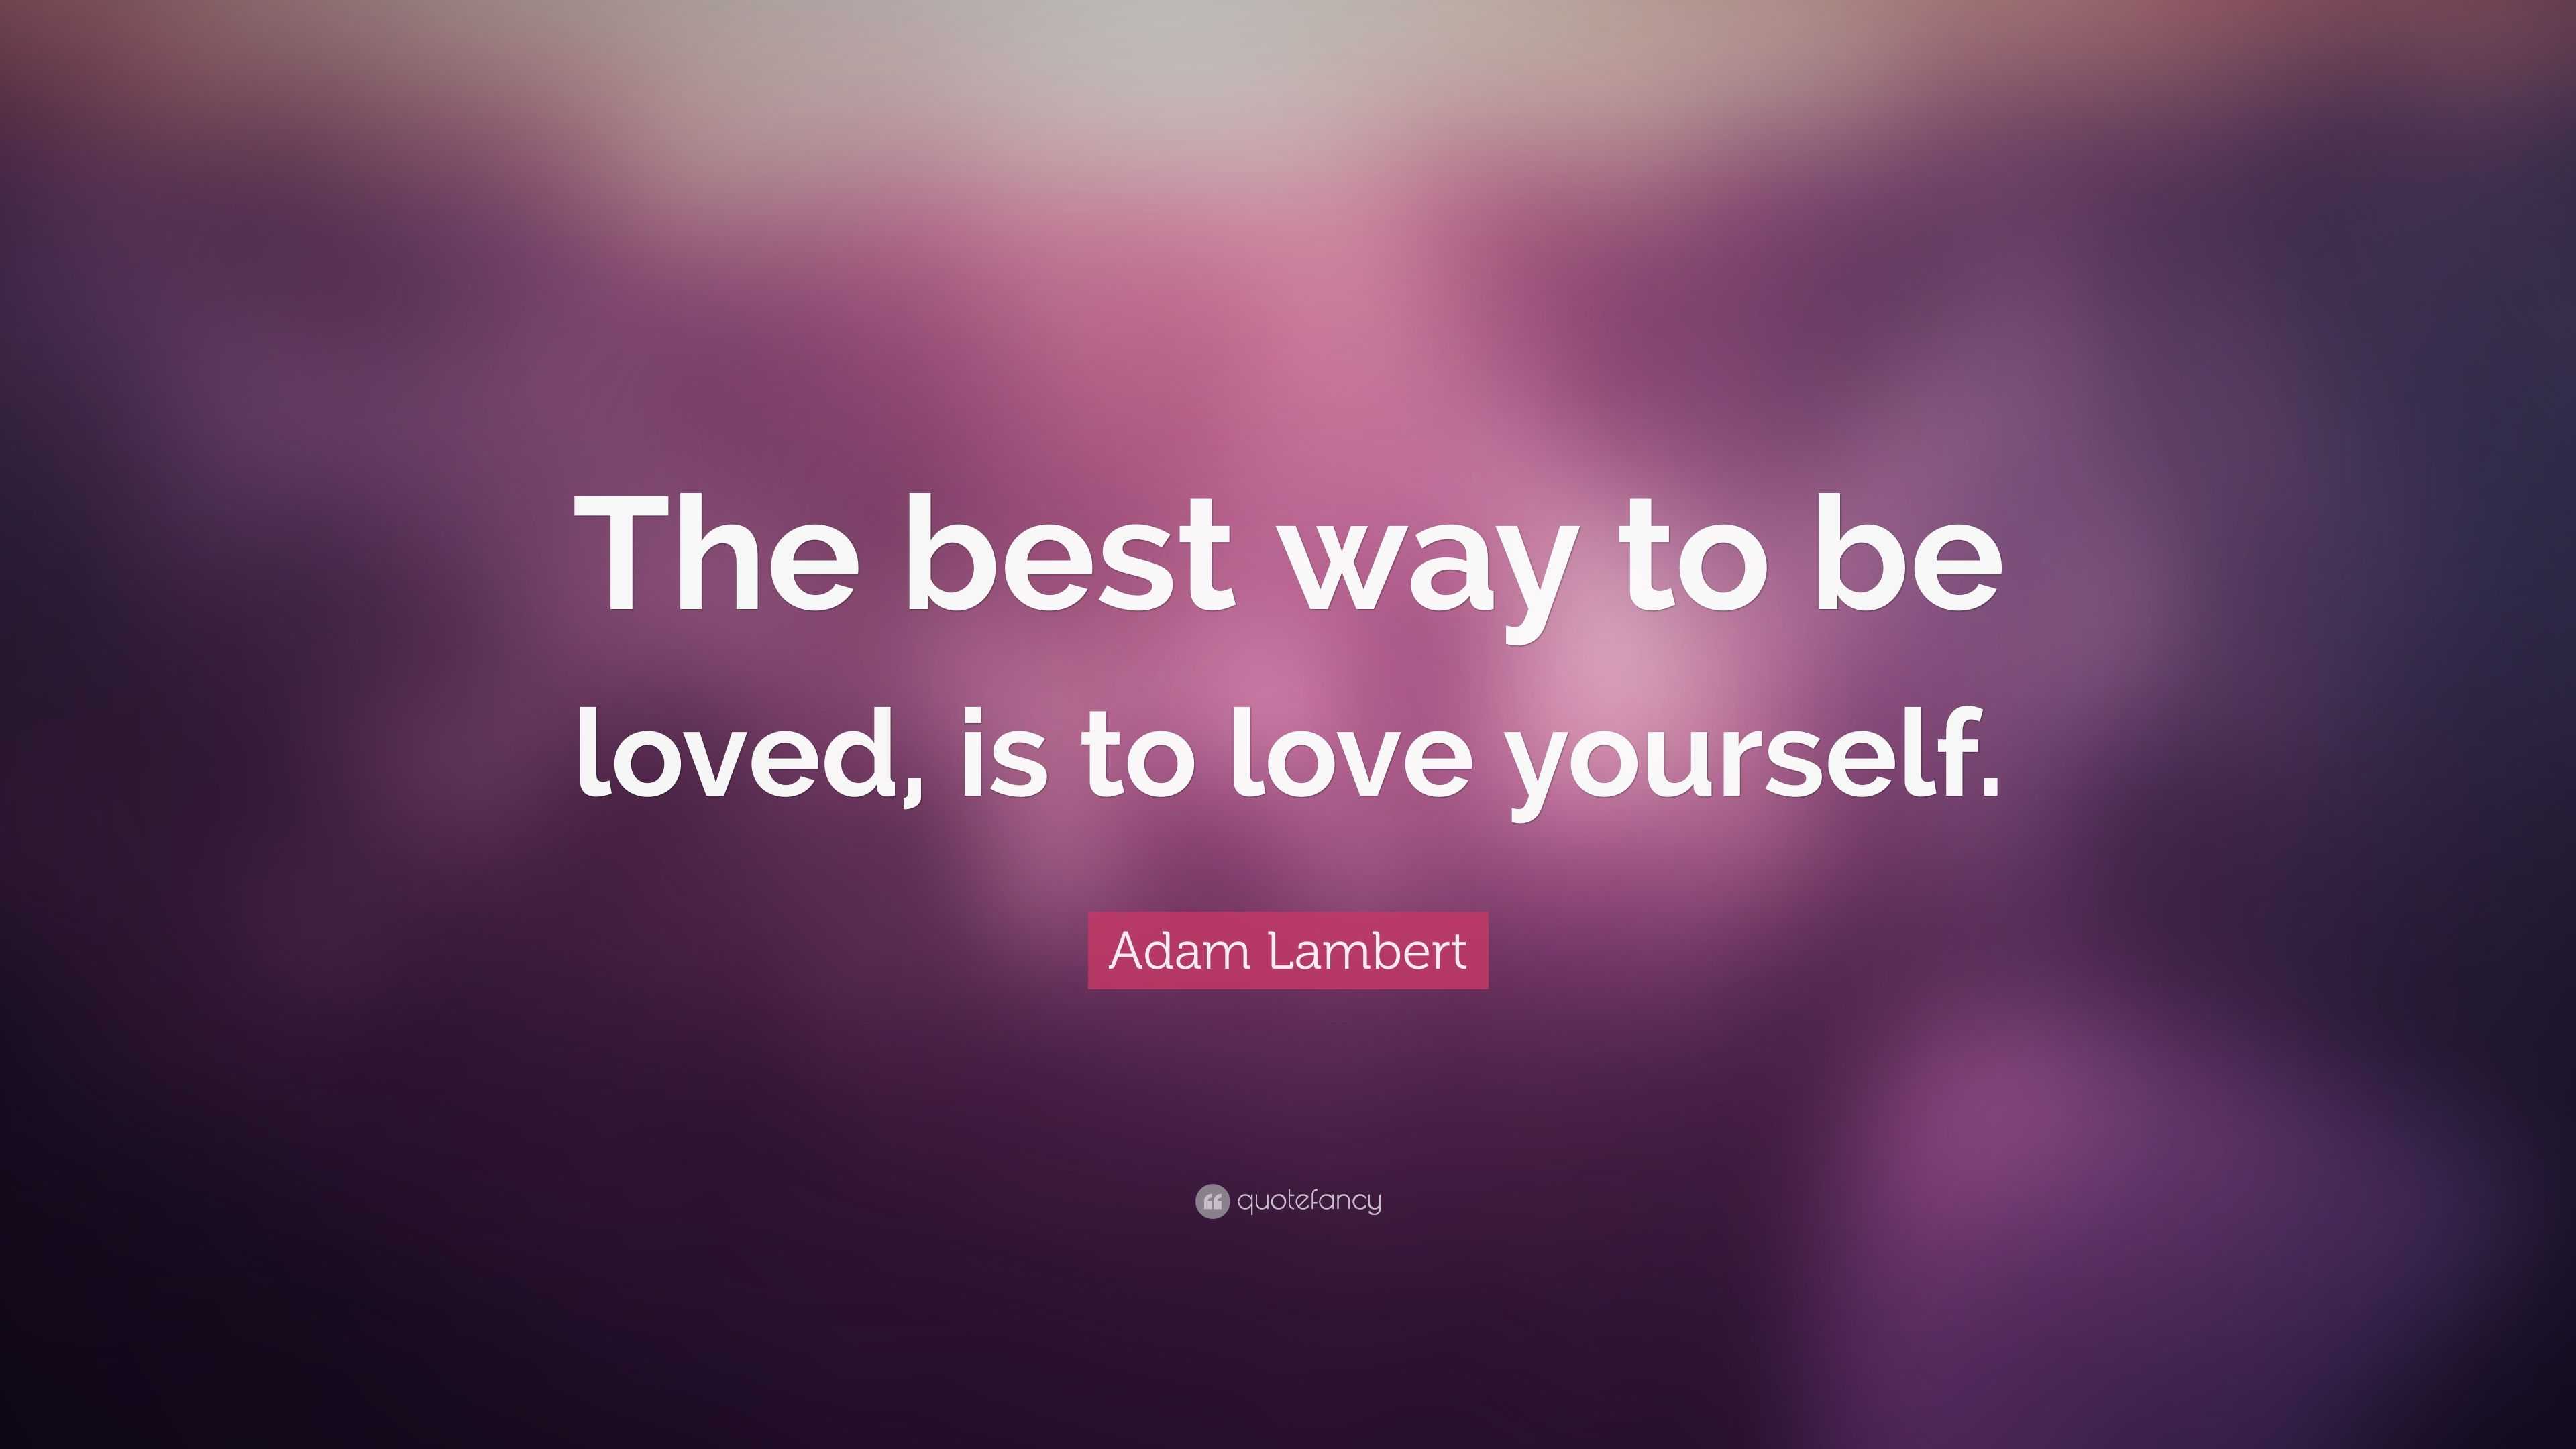 Adam Lambert Quote: “The best way to be loved, is to love yourself.”